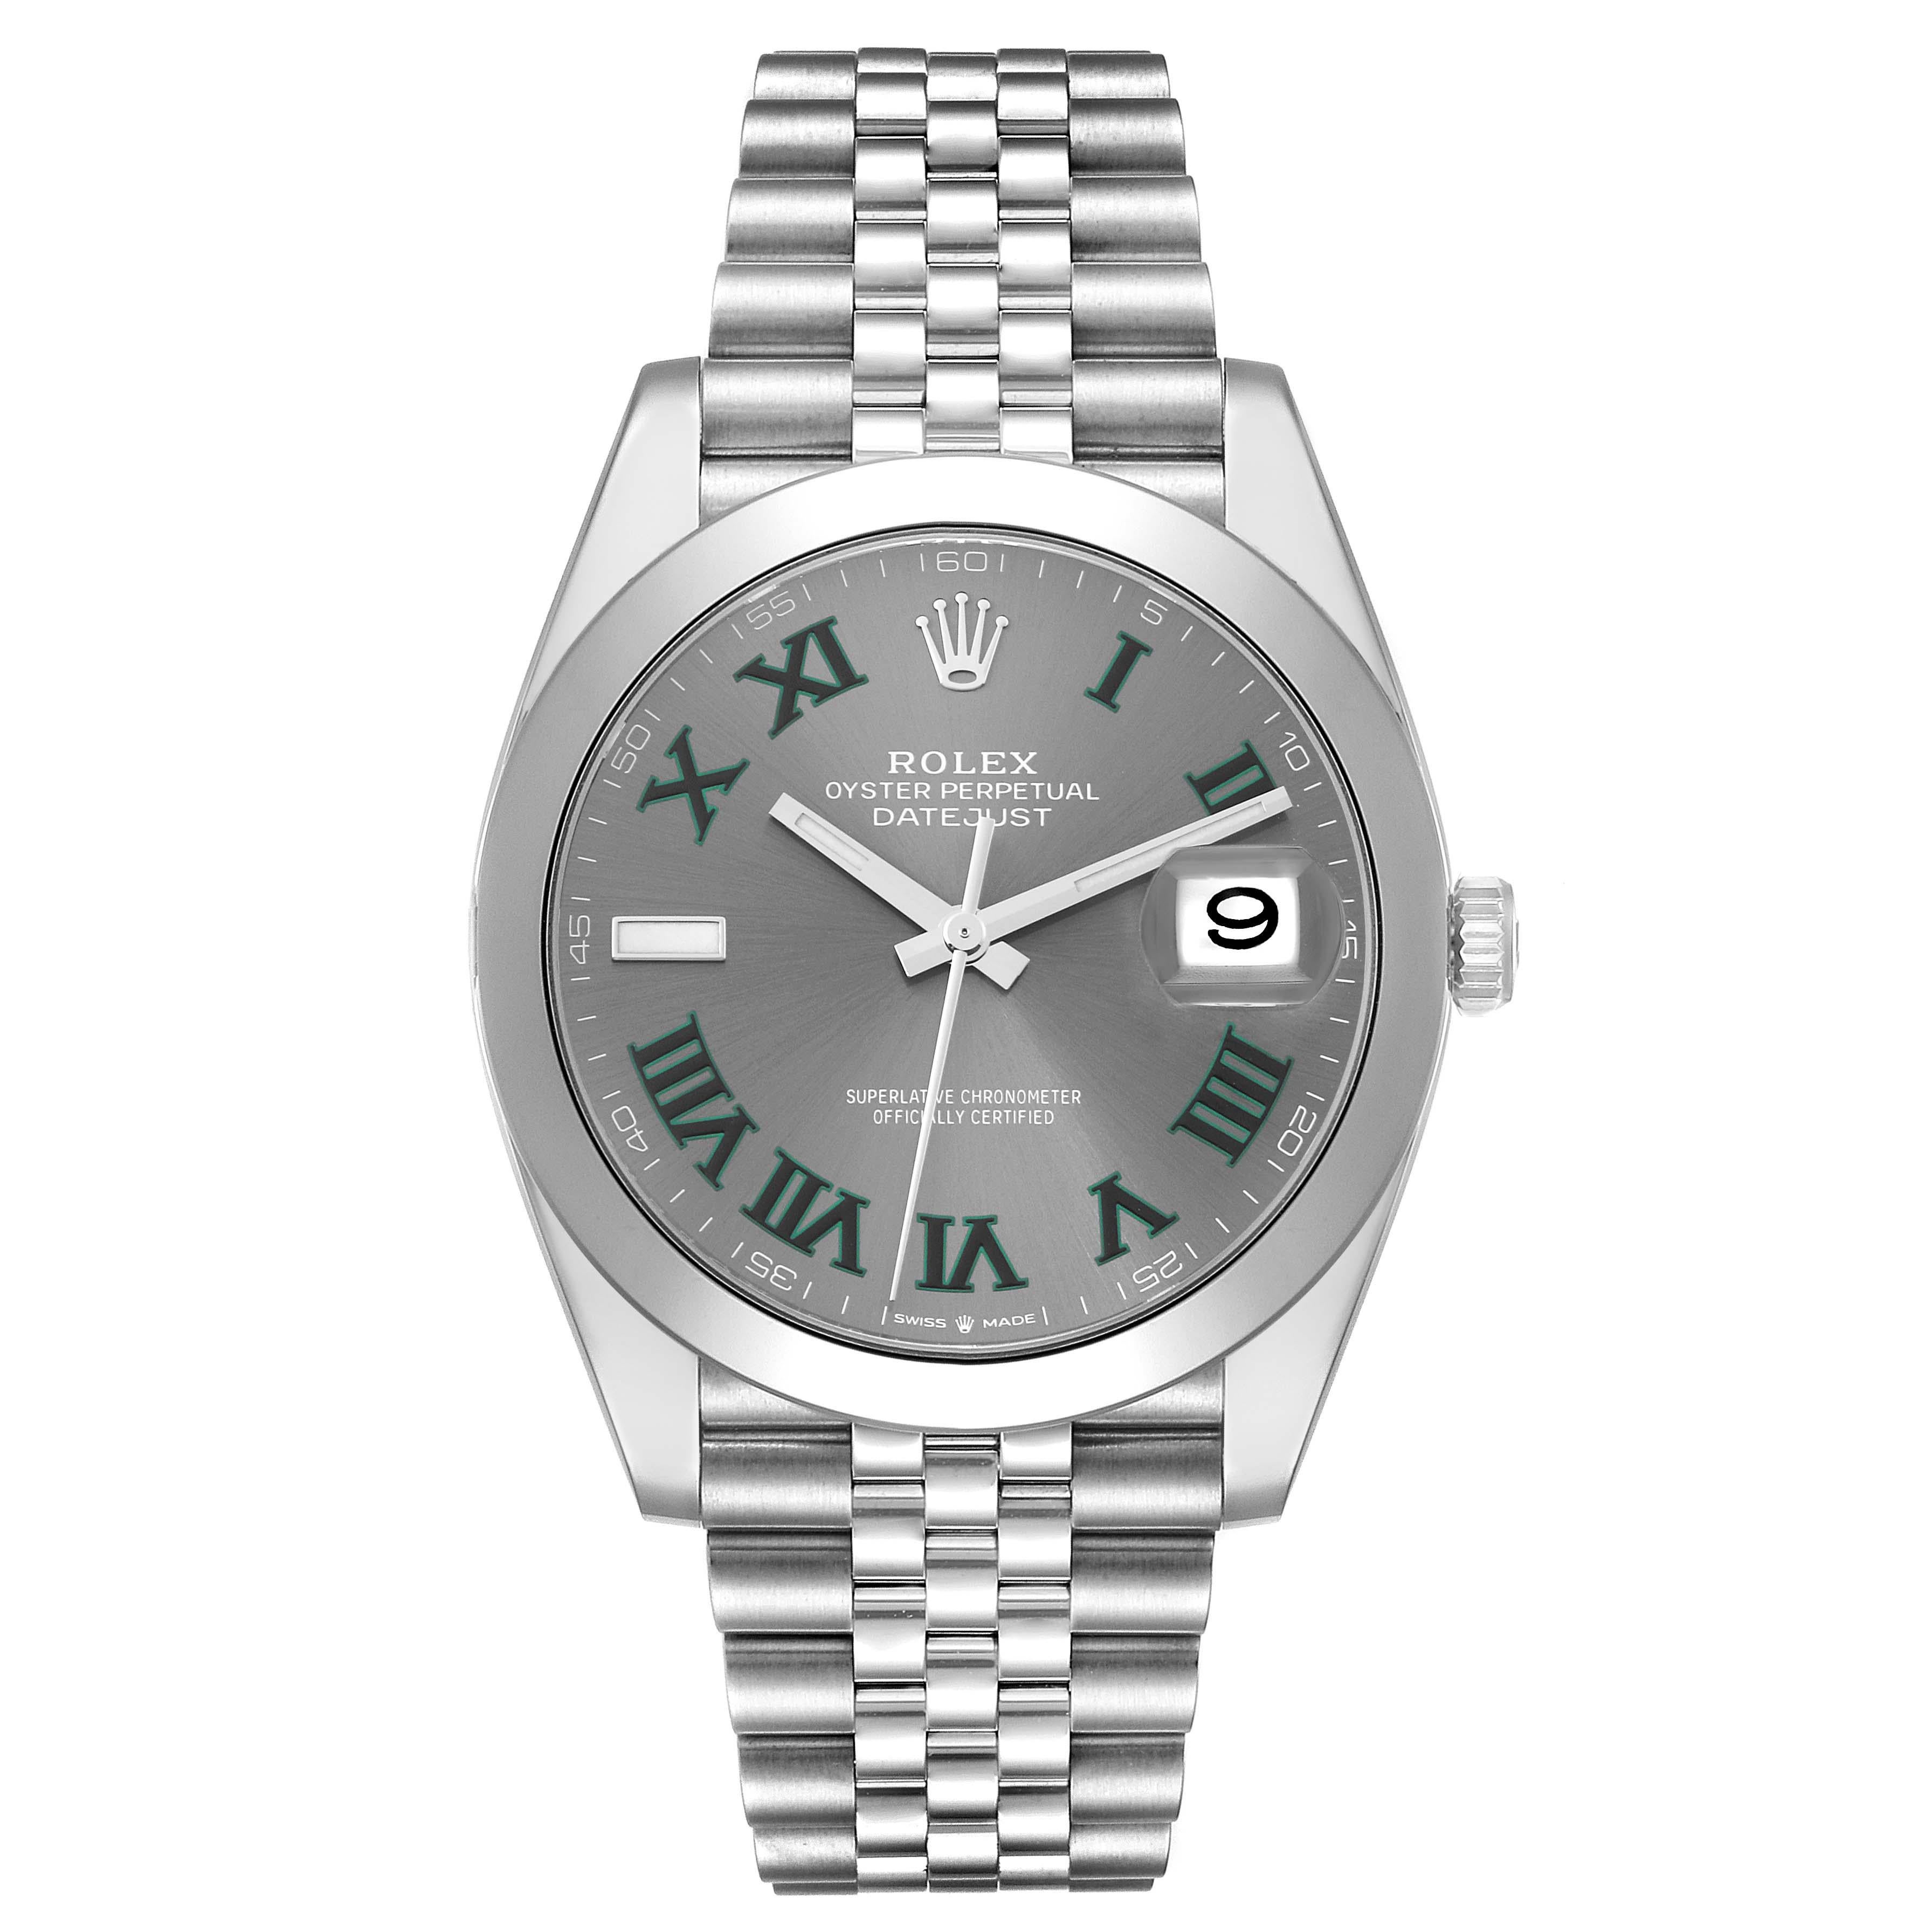 Rolex Datejust 41 Grey Green Wimbledon Dial Steel Mens Watch 126300 Unworn. Officially certified chronometer automatic self-winding movement with quickset date. Stainless steel case 41 mm in diameter. Rolex logo on a crown. Stainless steel smooth